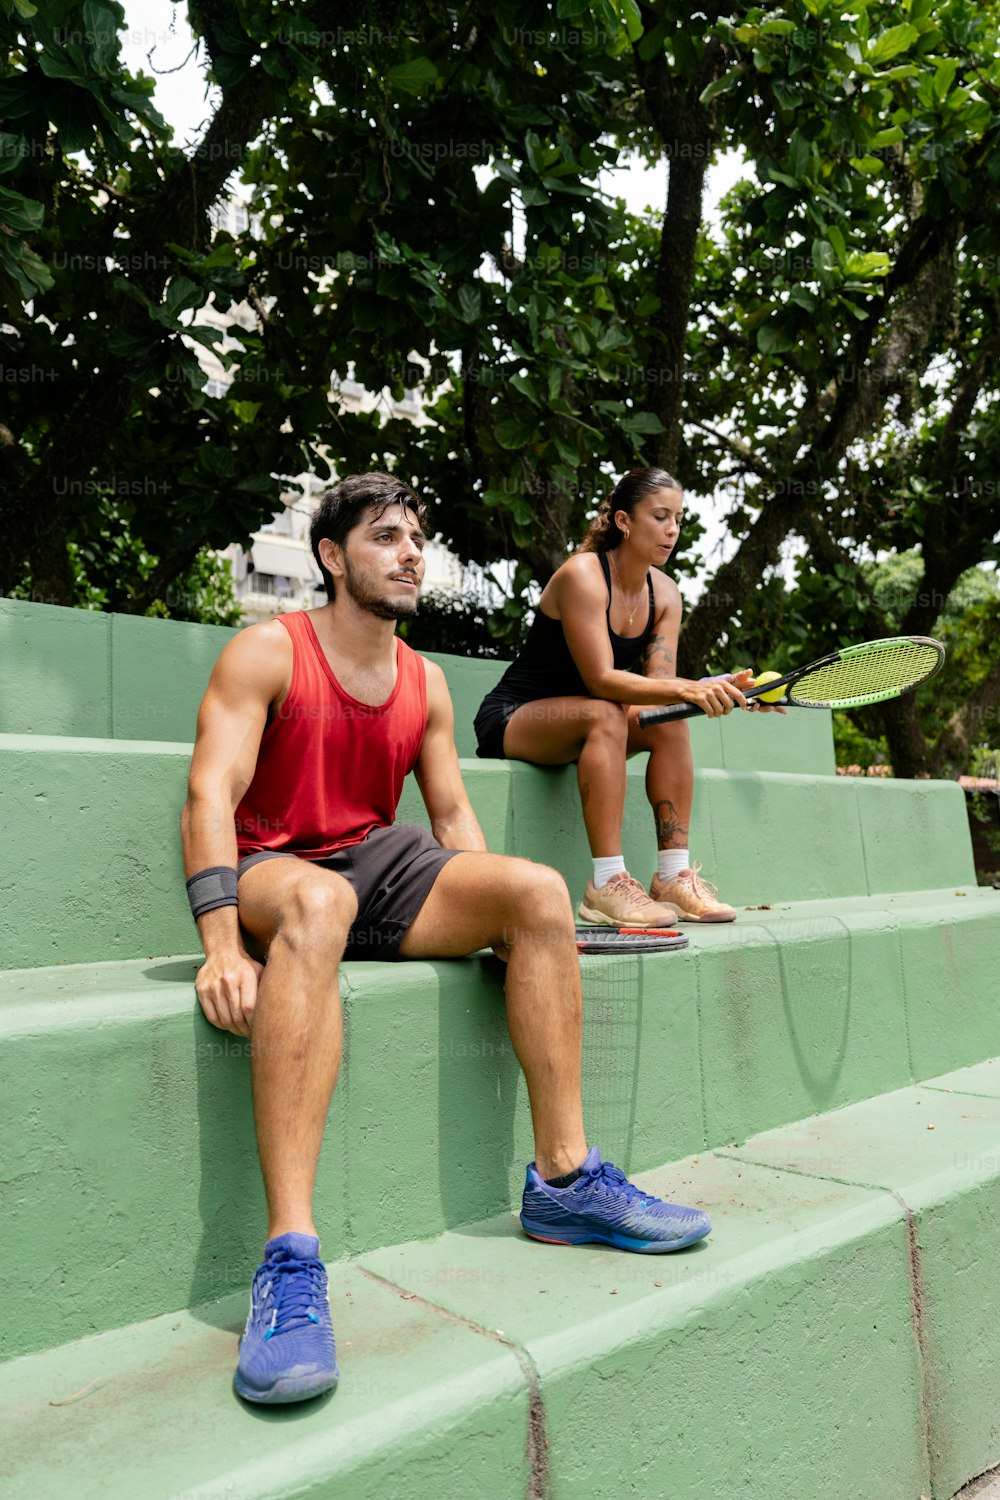 a man and a woman sitting on steps with tennis rackets